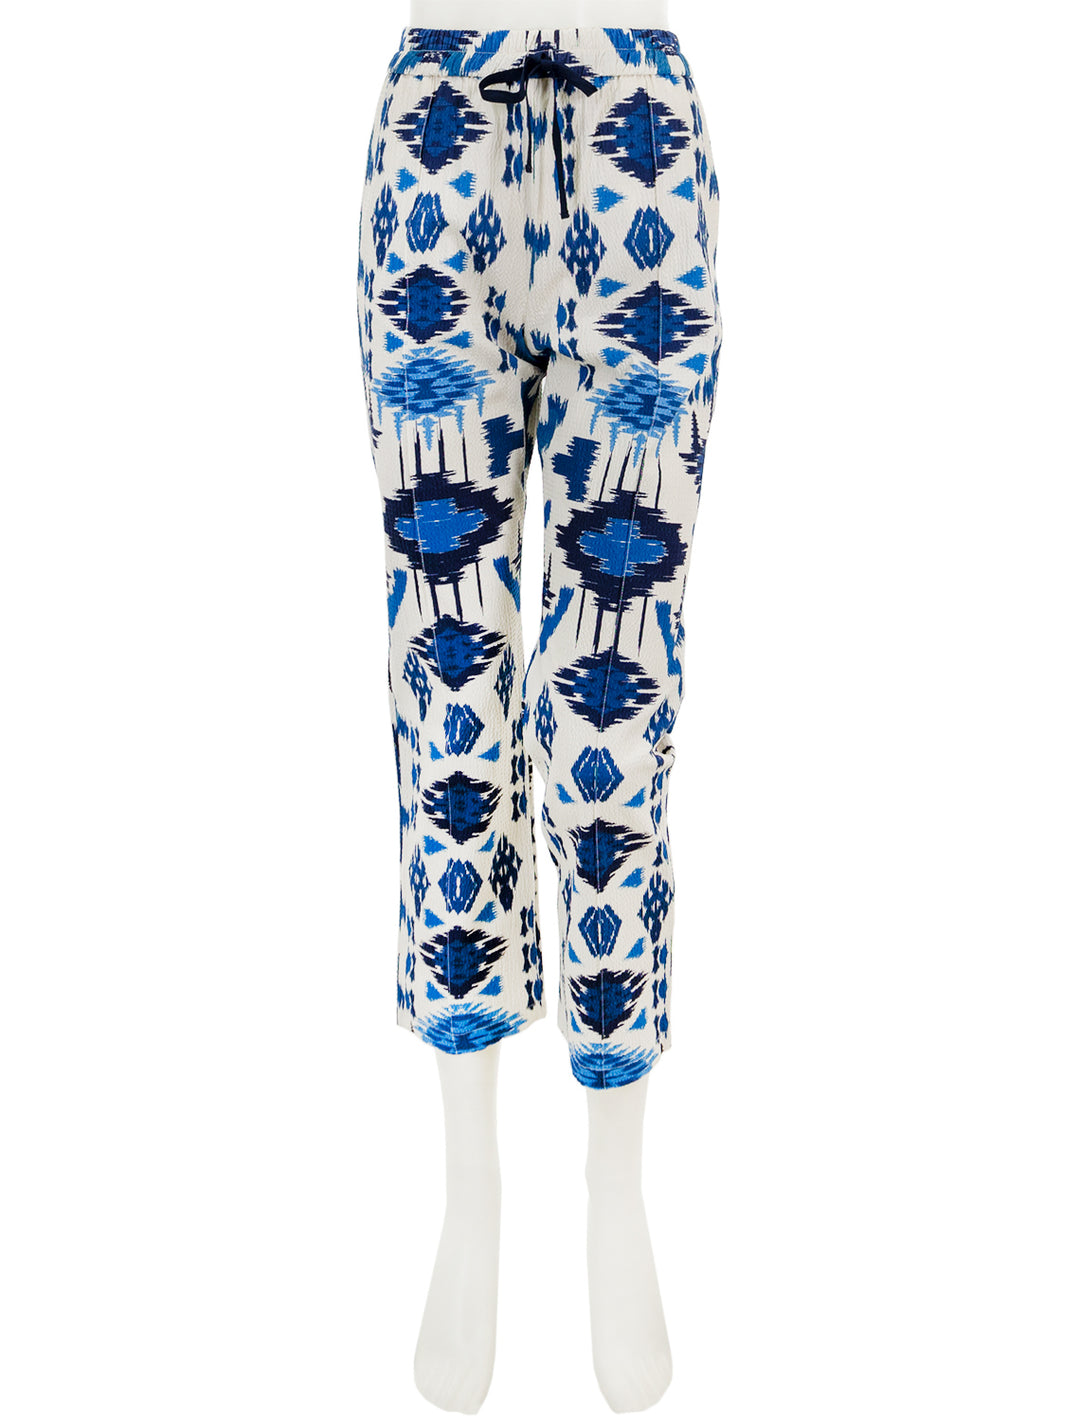 Front view of Vilagallo's clarise pant in blue ikat.